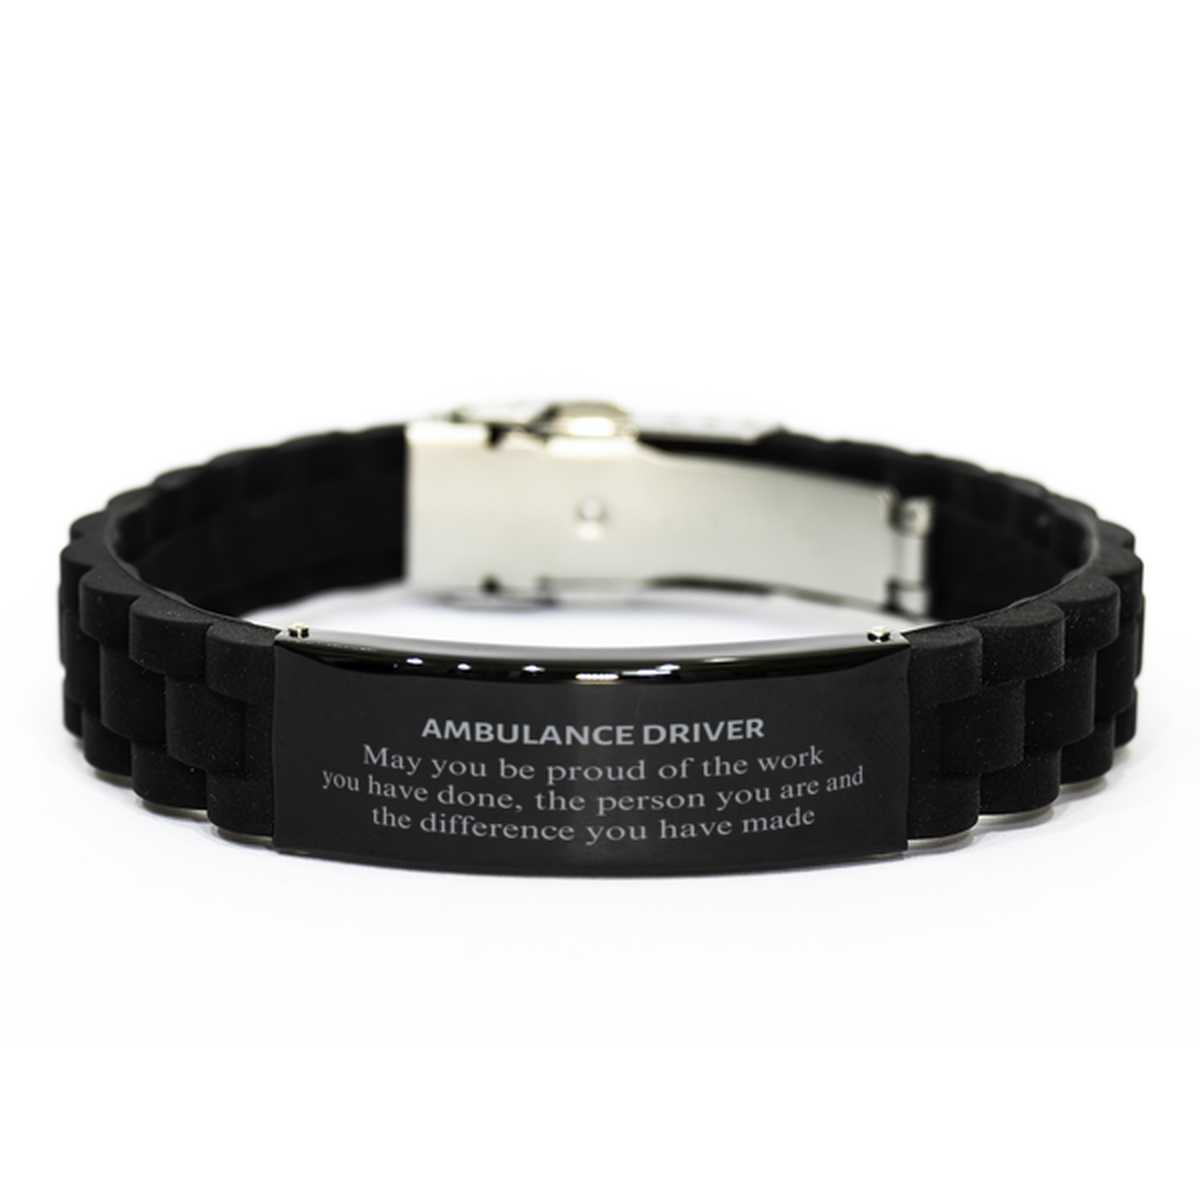 Ambulance Driver May you be proud of the work you have done, Retirement Ambulance Driver Black Glidelock Clasp Bracelet for Colleague Appreciation Gifts Amazing for Ambulance Driver